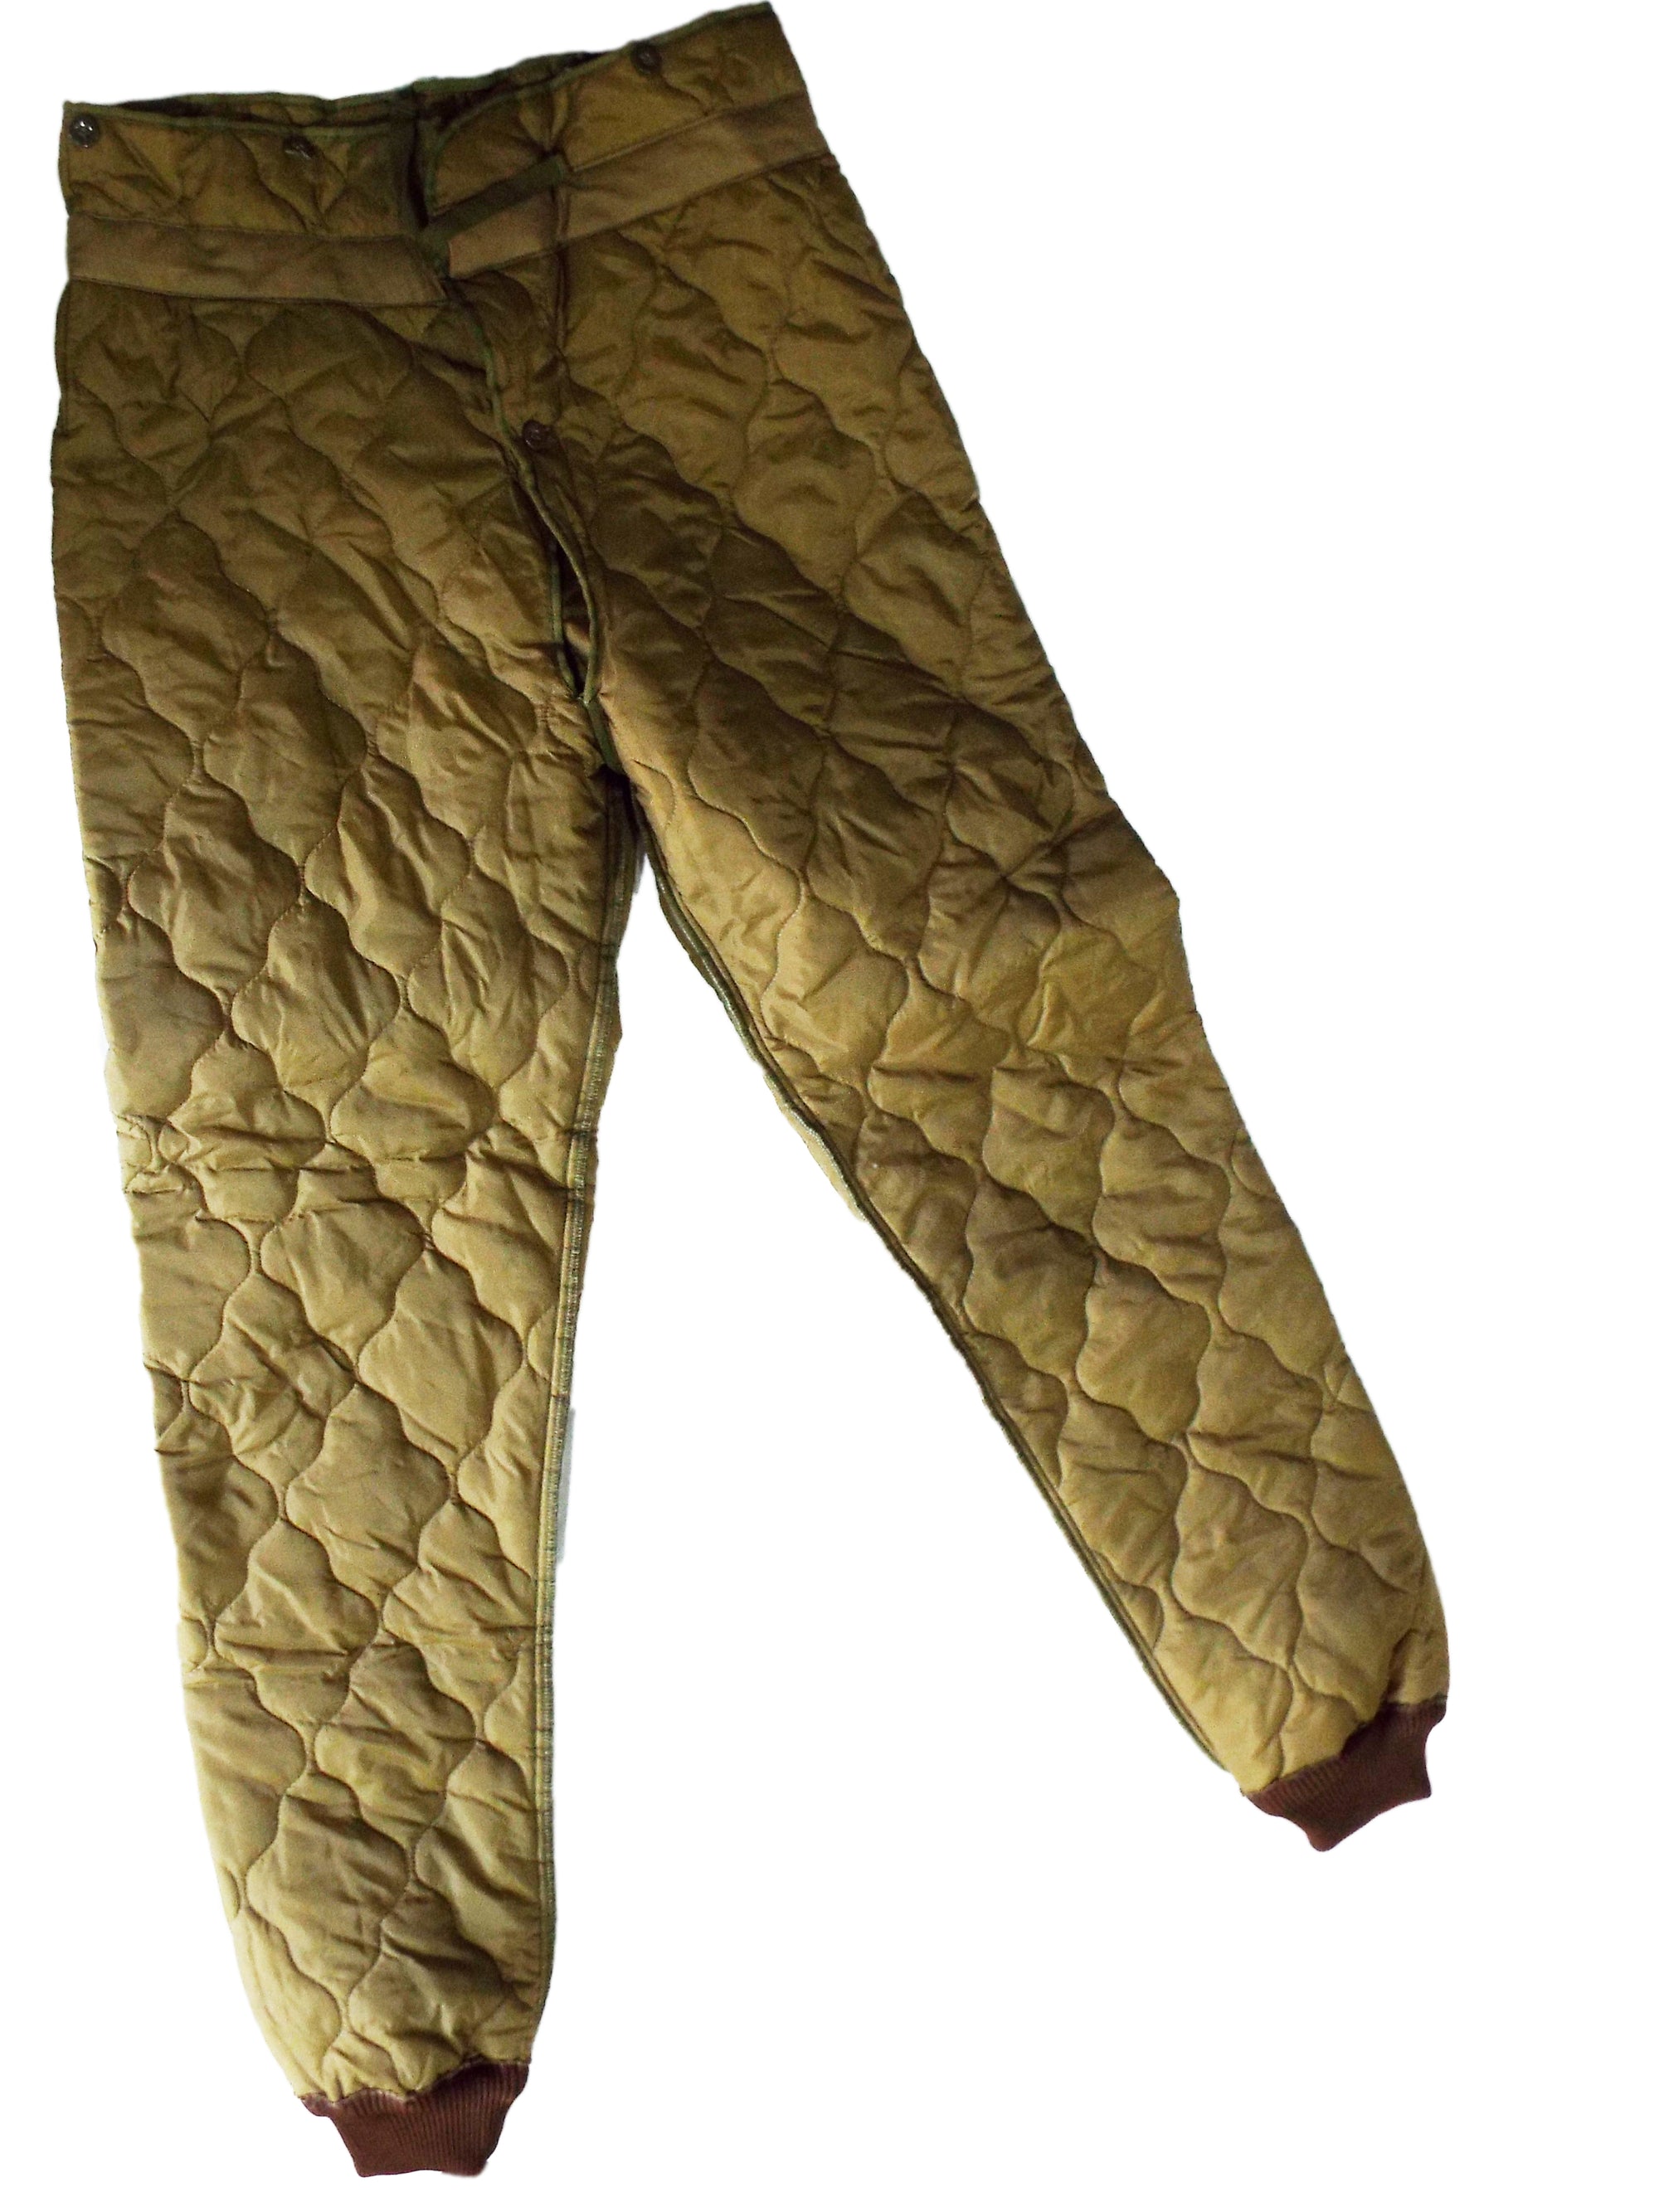 British Army Thermal Over Trousers - Small